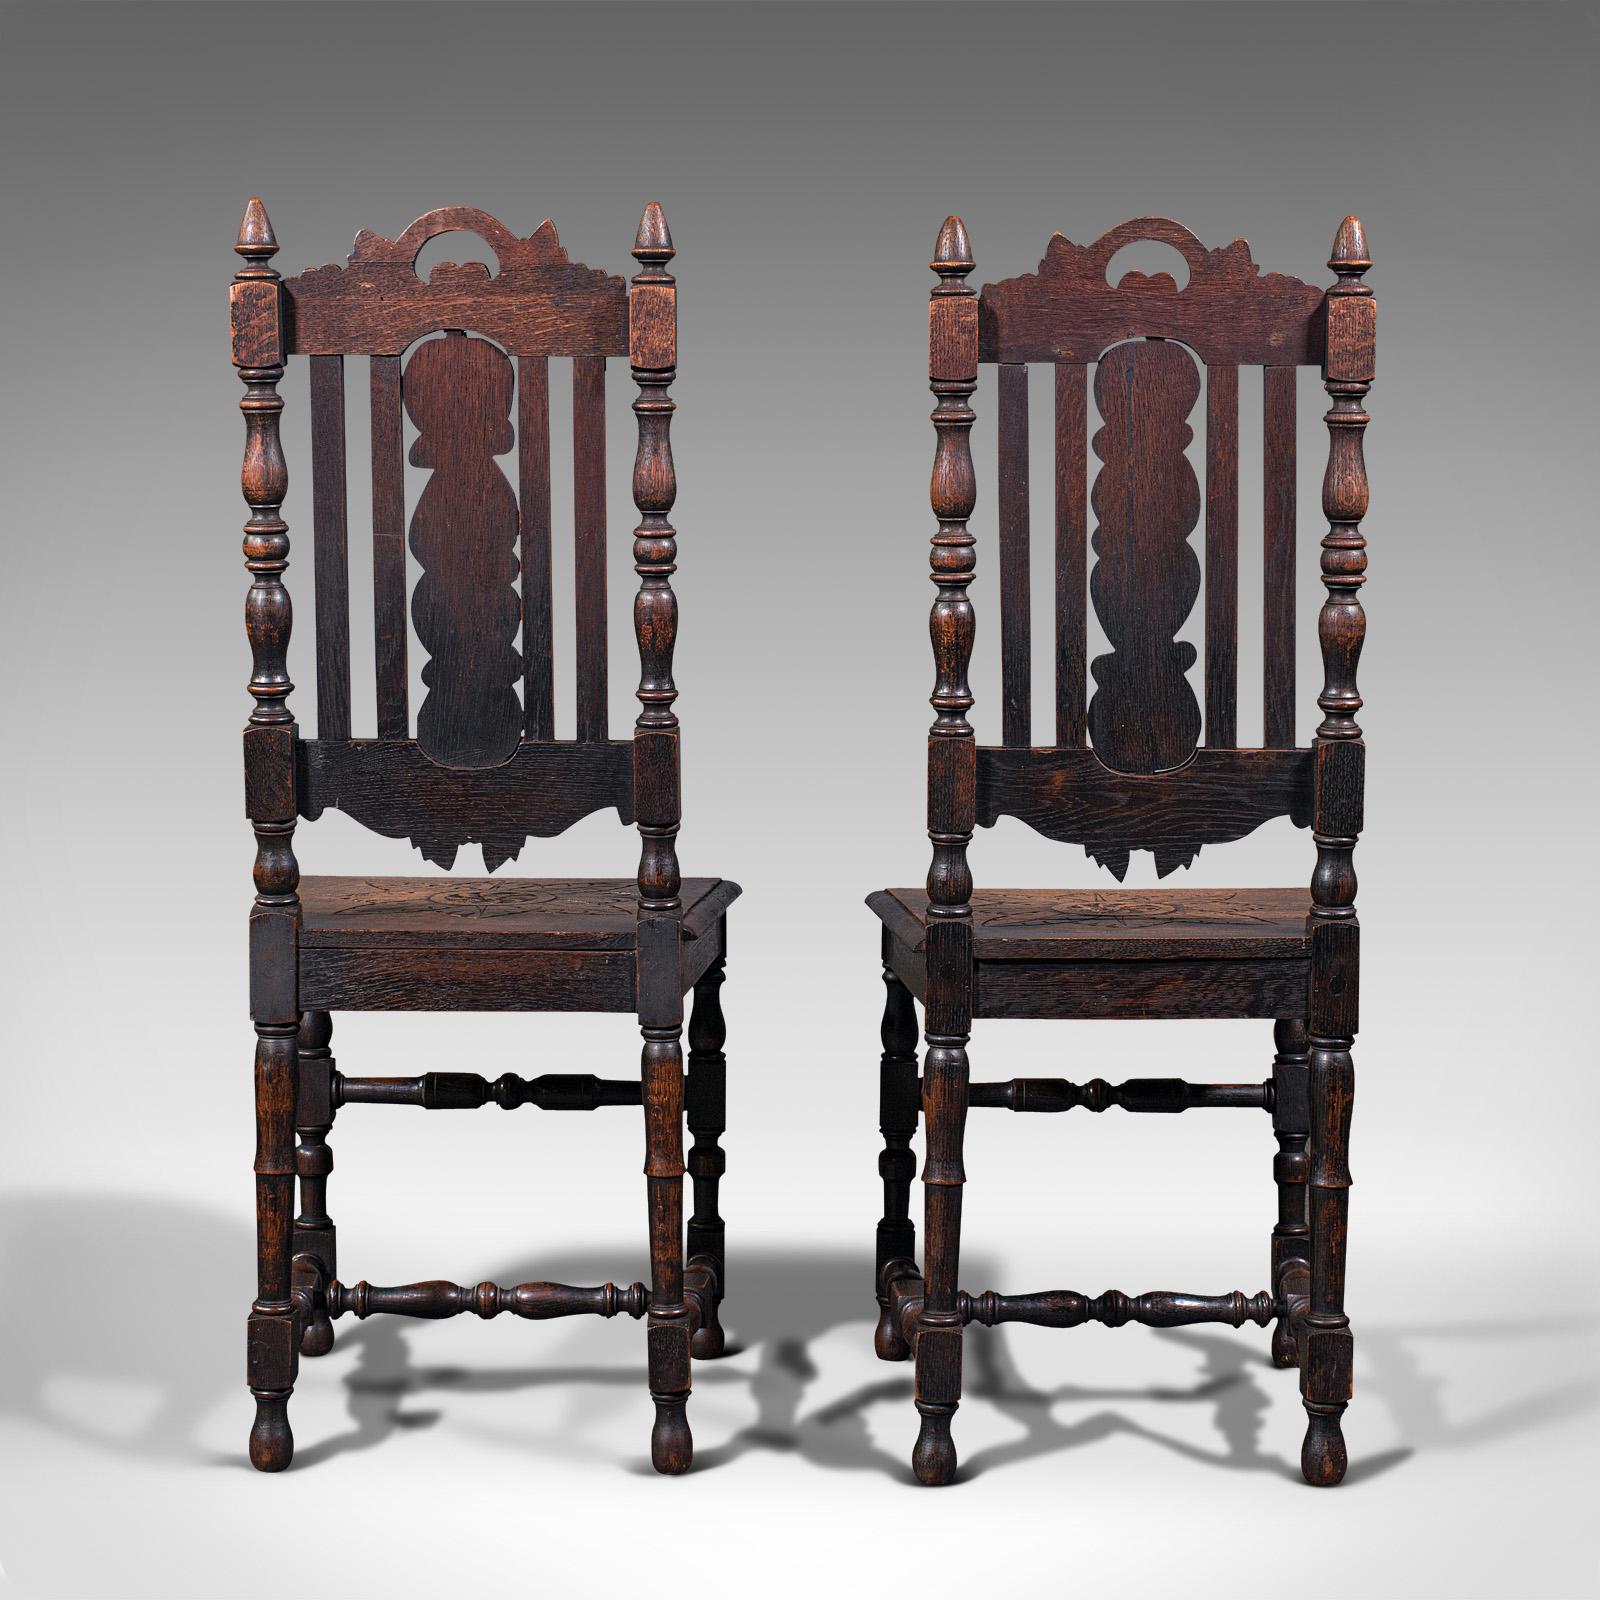 Antique Carved Hall Chairs, Scottish, Oak, Decorative, Side Seat, Victorian 1